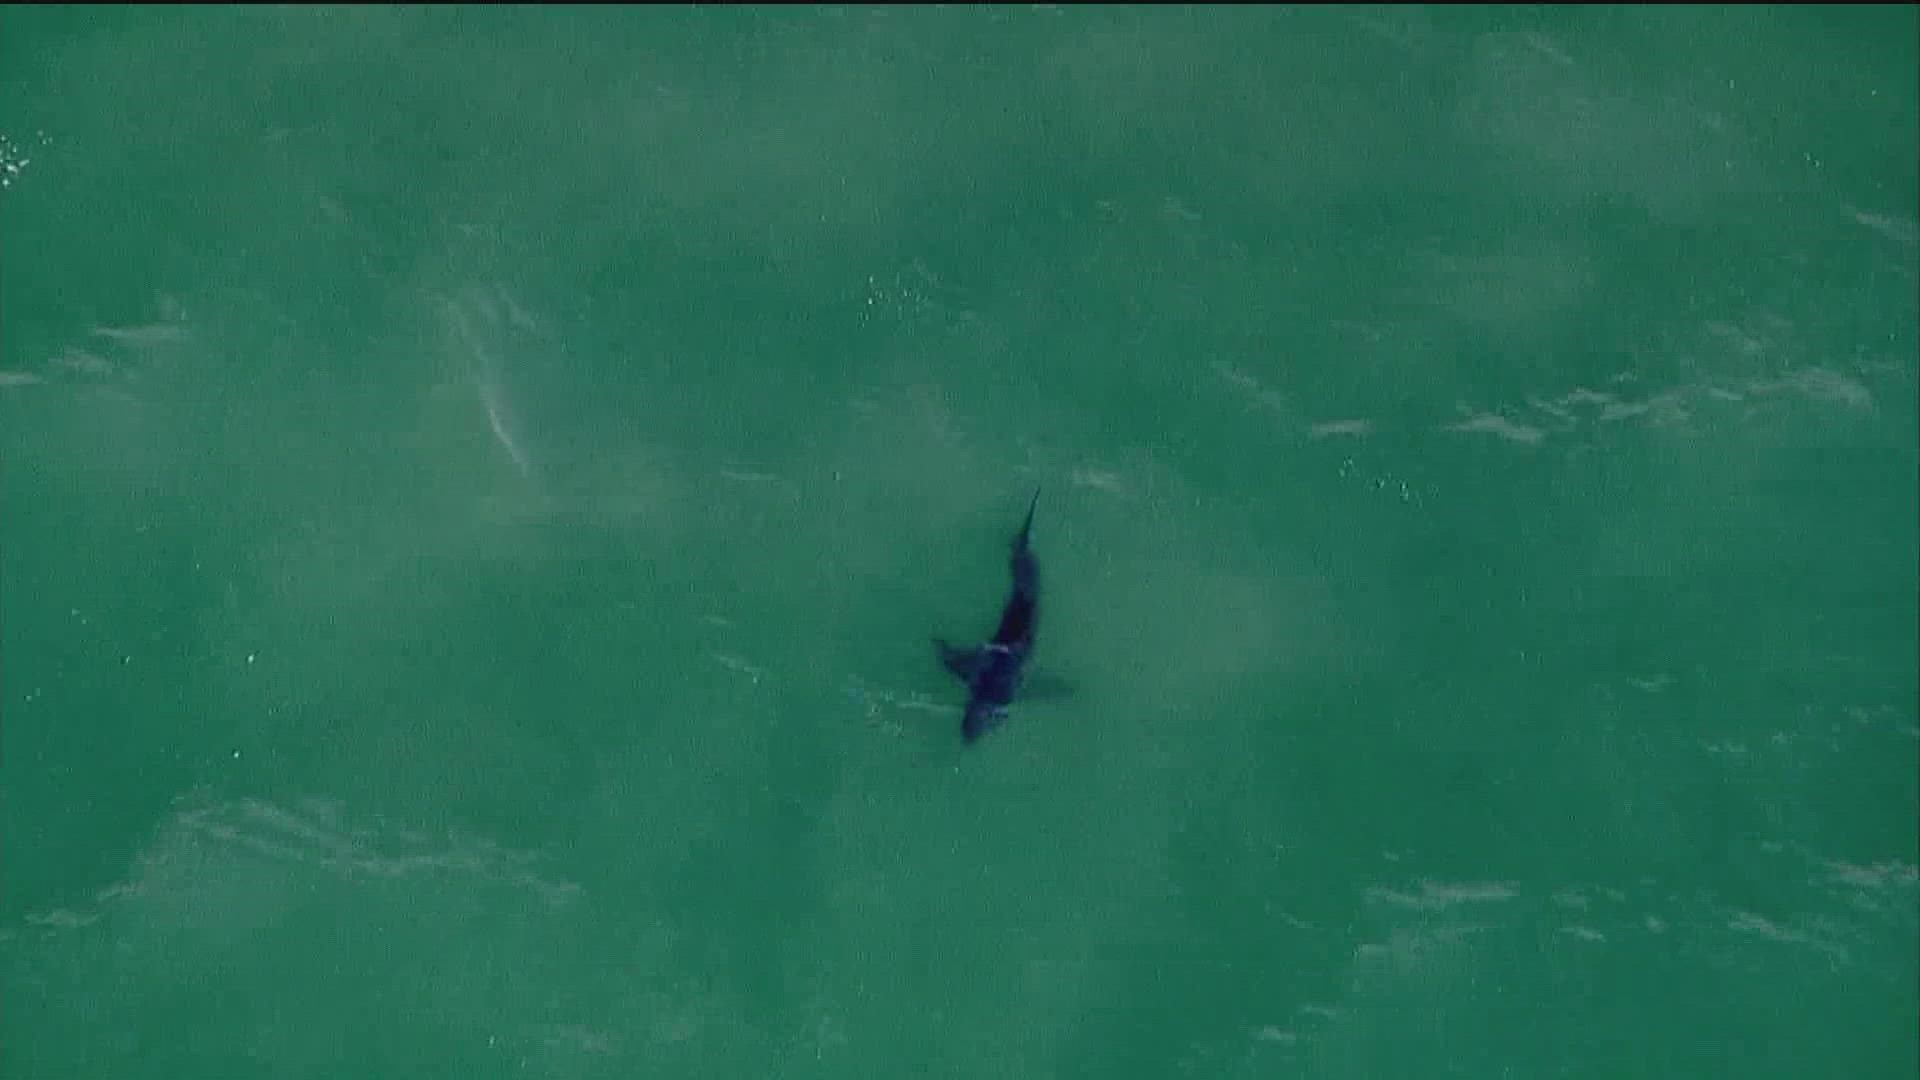 A woman attacked by a shark in the Del Mar area of San Diego stressed the importance of swimming with a buddy and near a lifeguard.